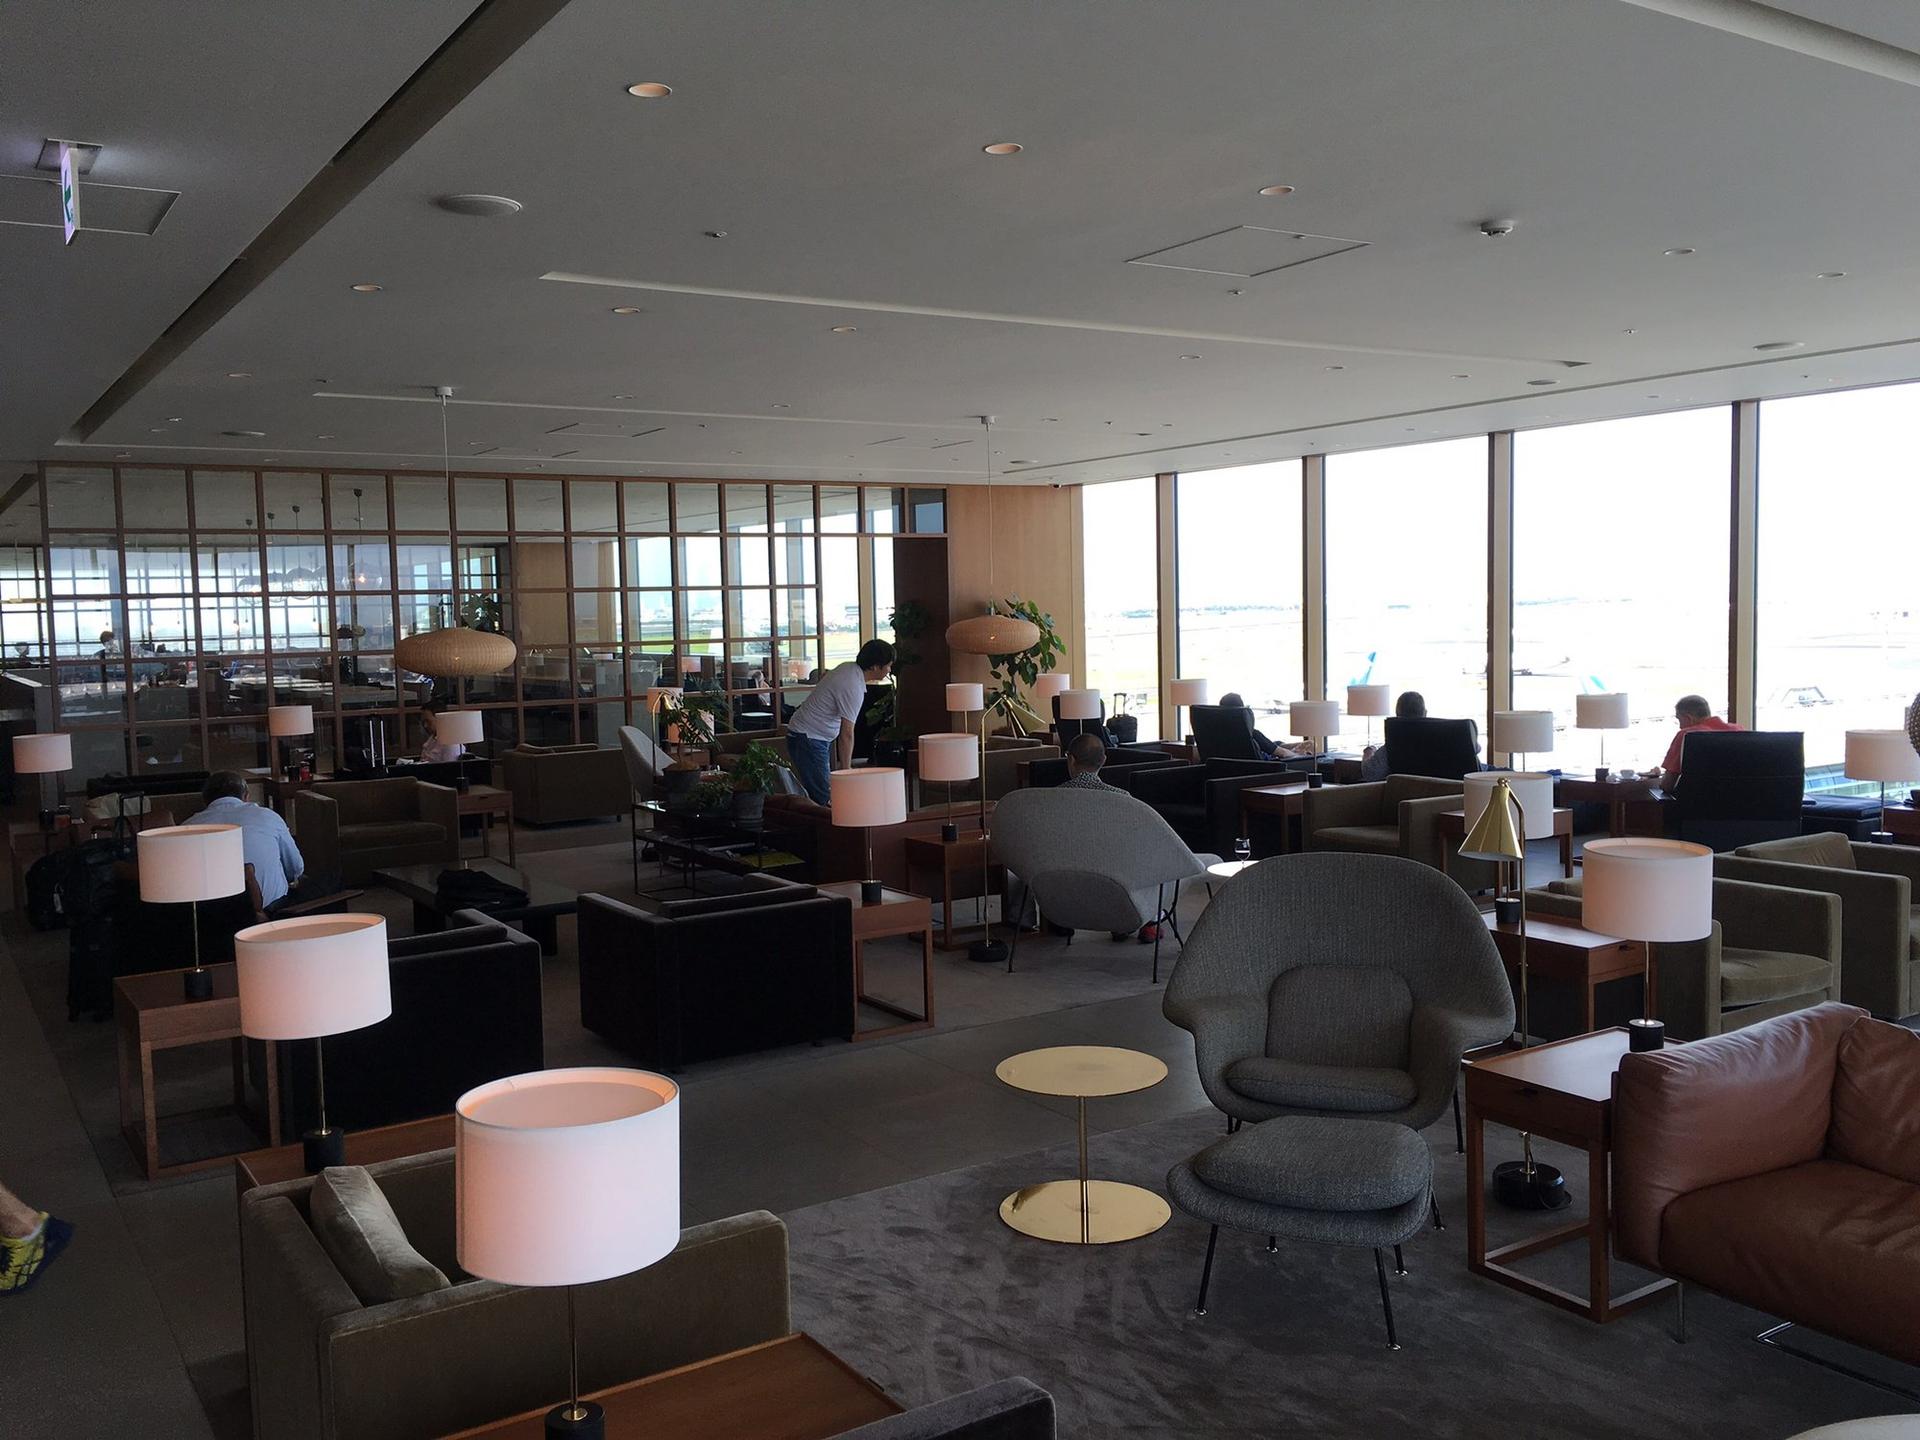 Cathay Pacific Lounge image 30 of 49